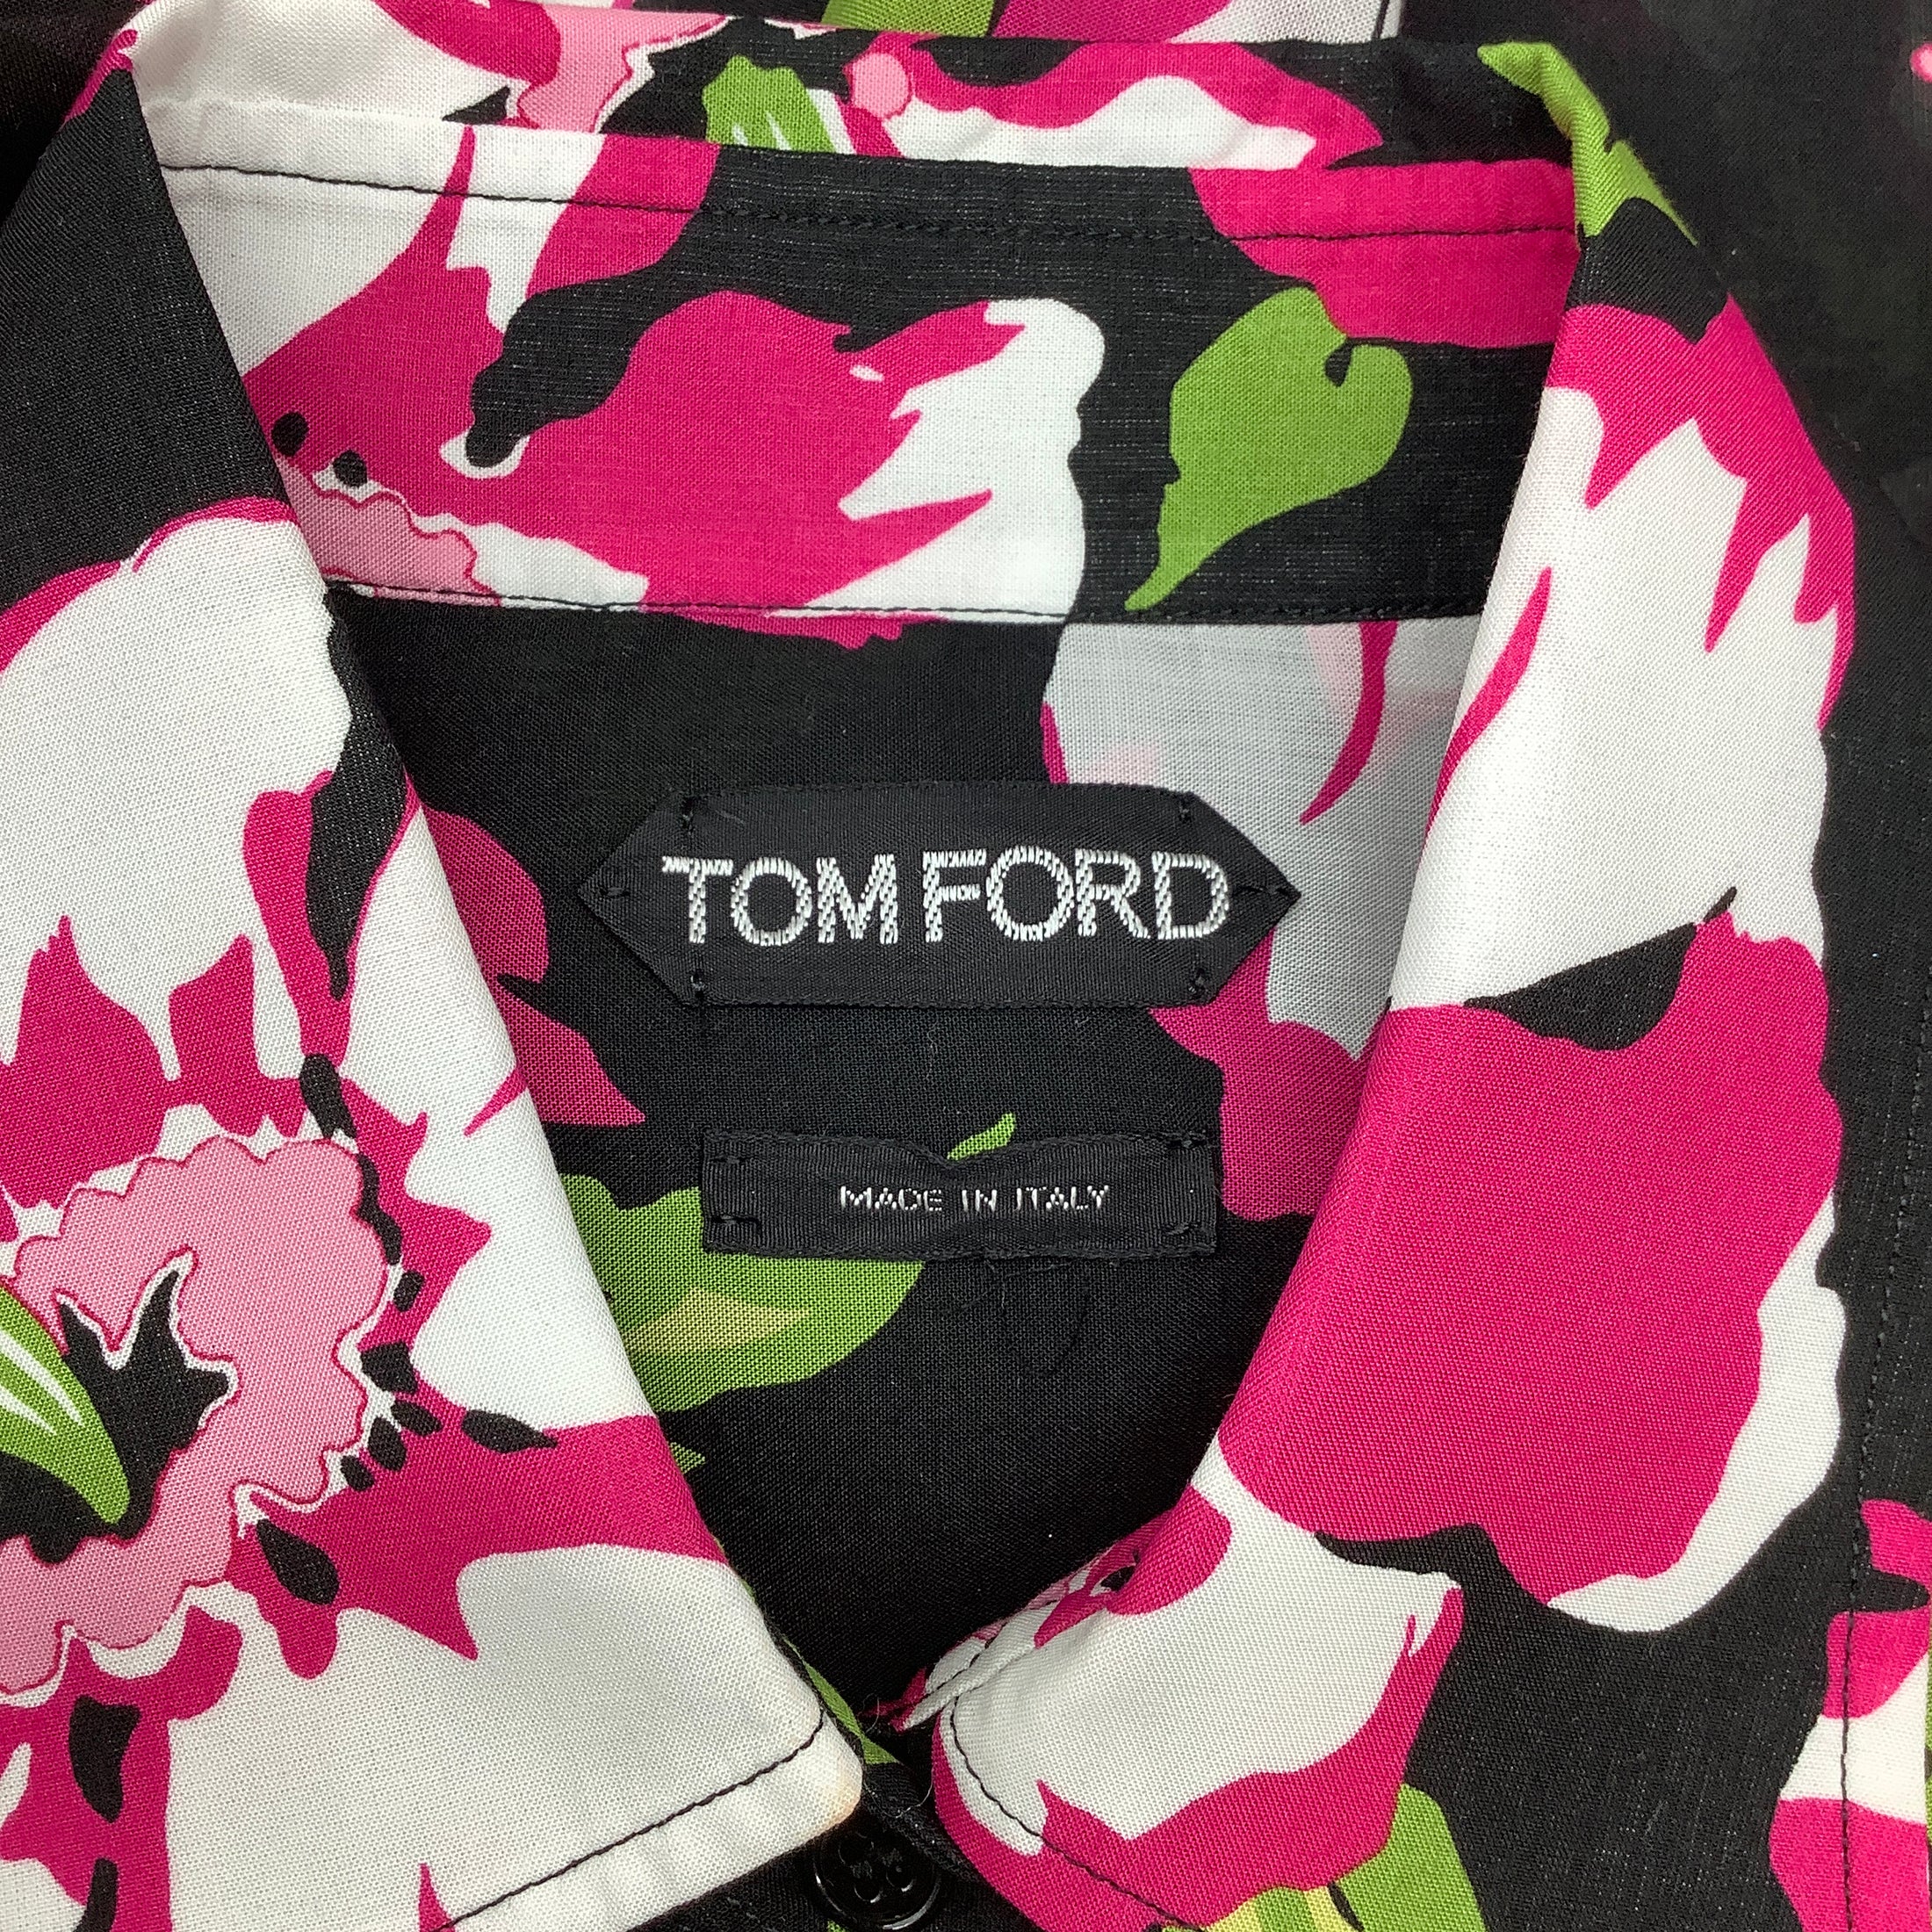 Tom Ford Black/Pink Hibiscus Print Oversized Button-down Top